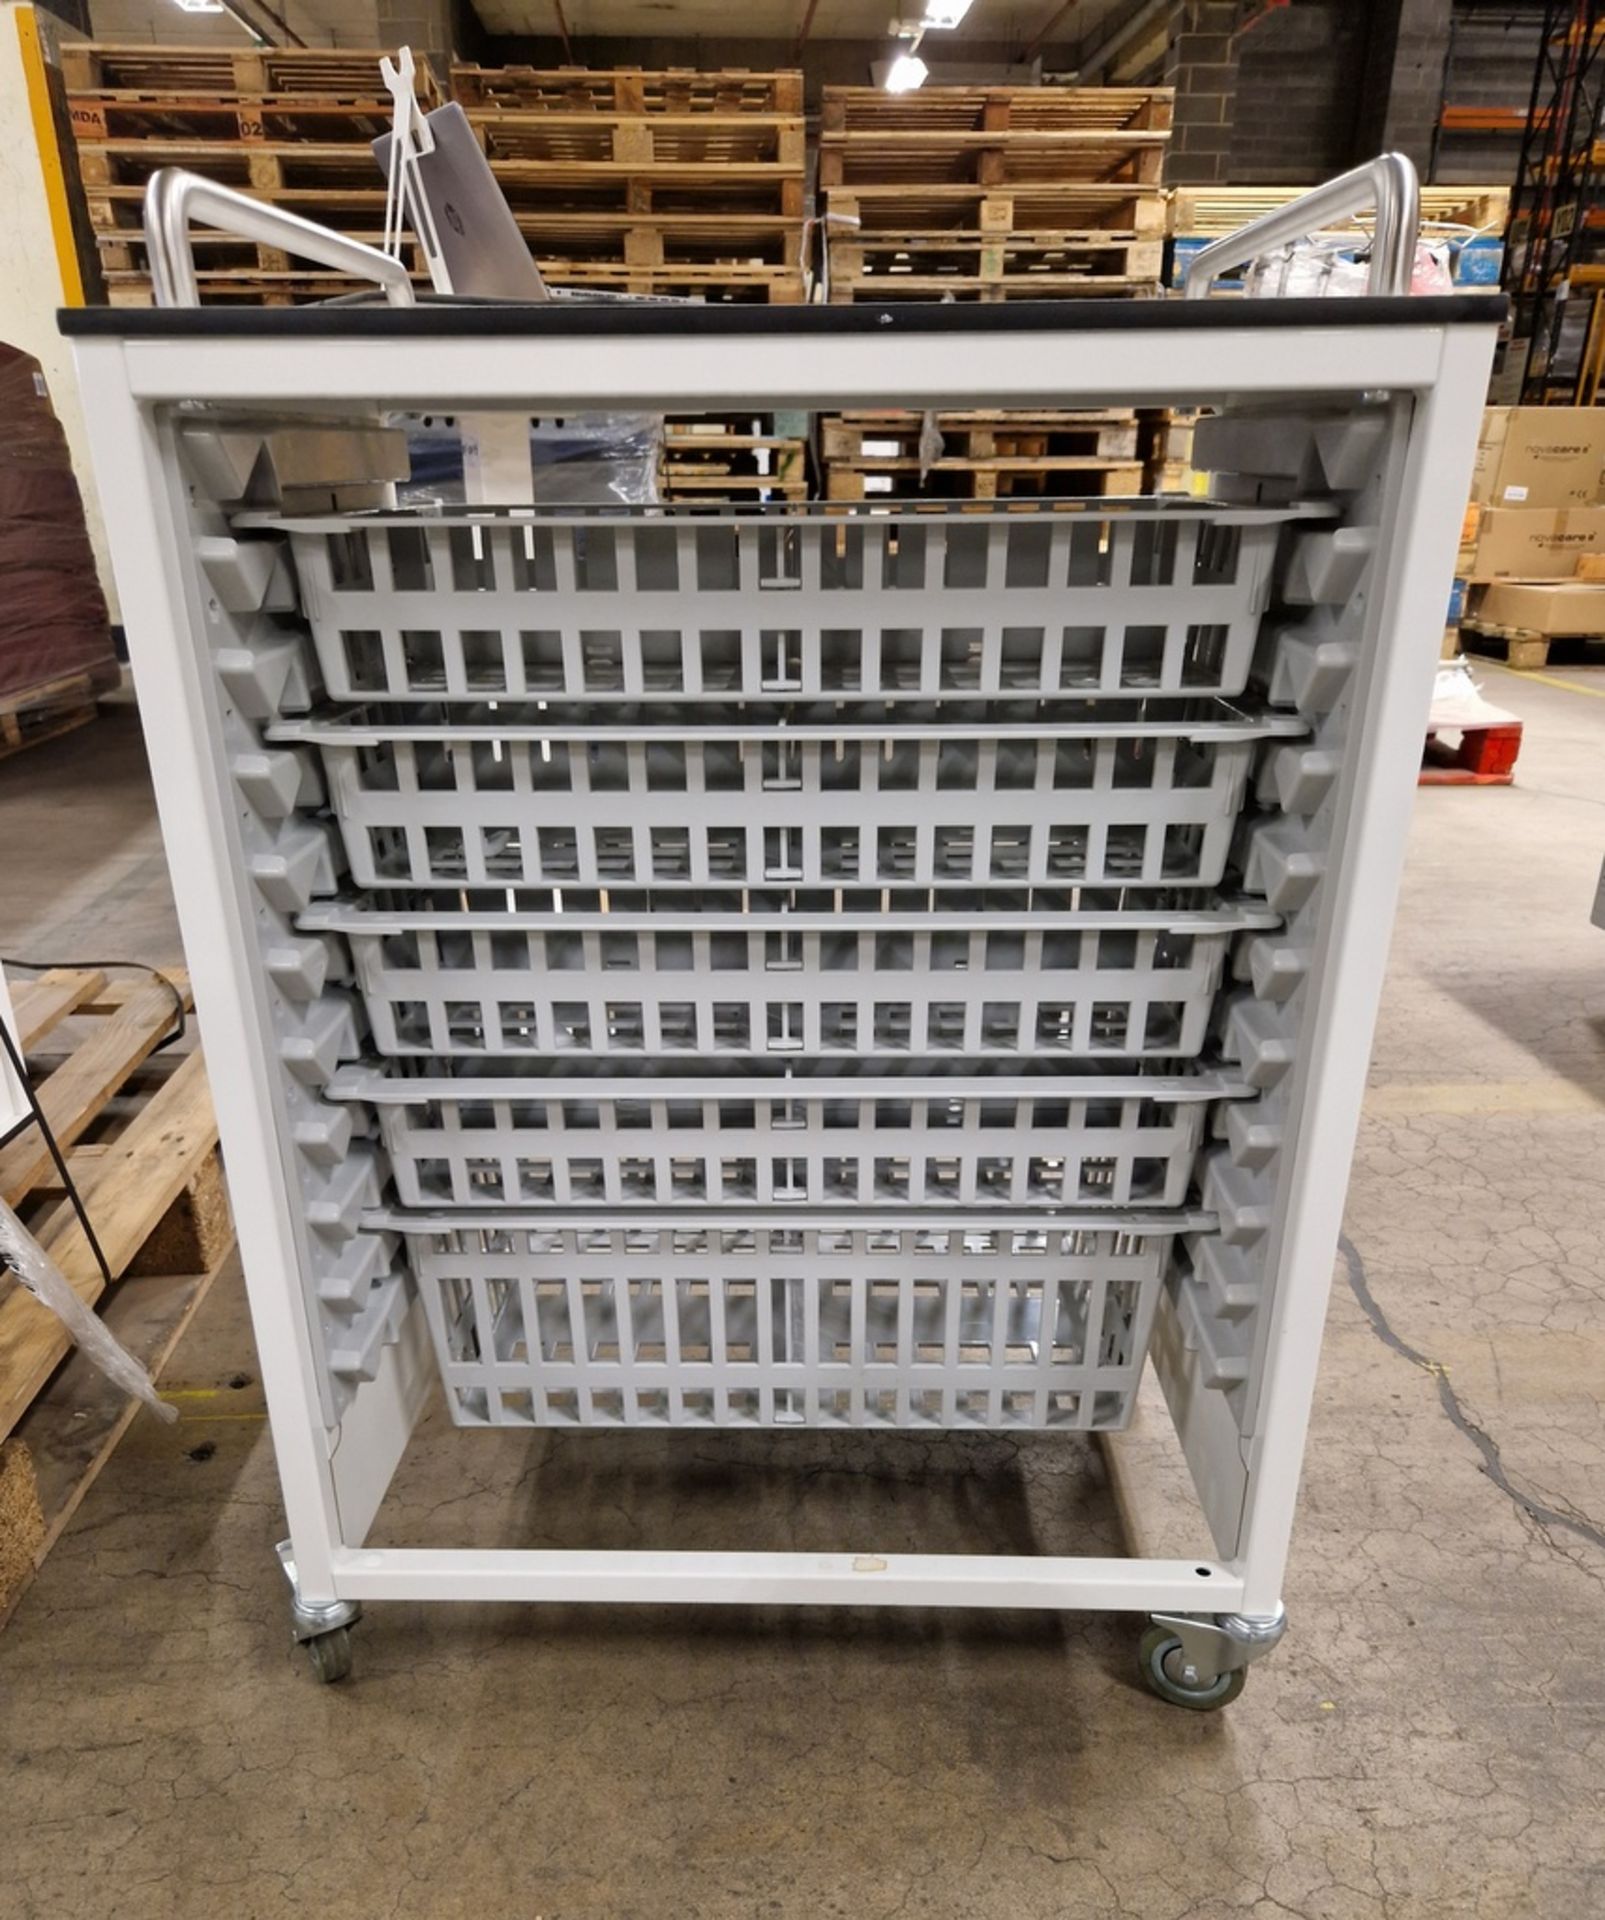 16x dispensing 4 drawer trolley crates 67x48x89cm (LxWxH) - Image 4 of 4